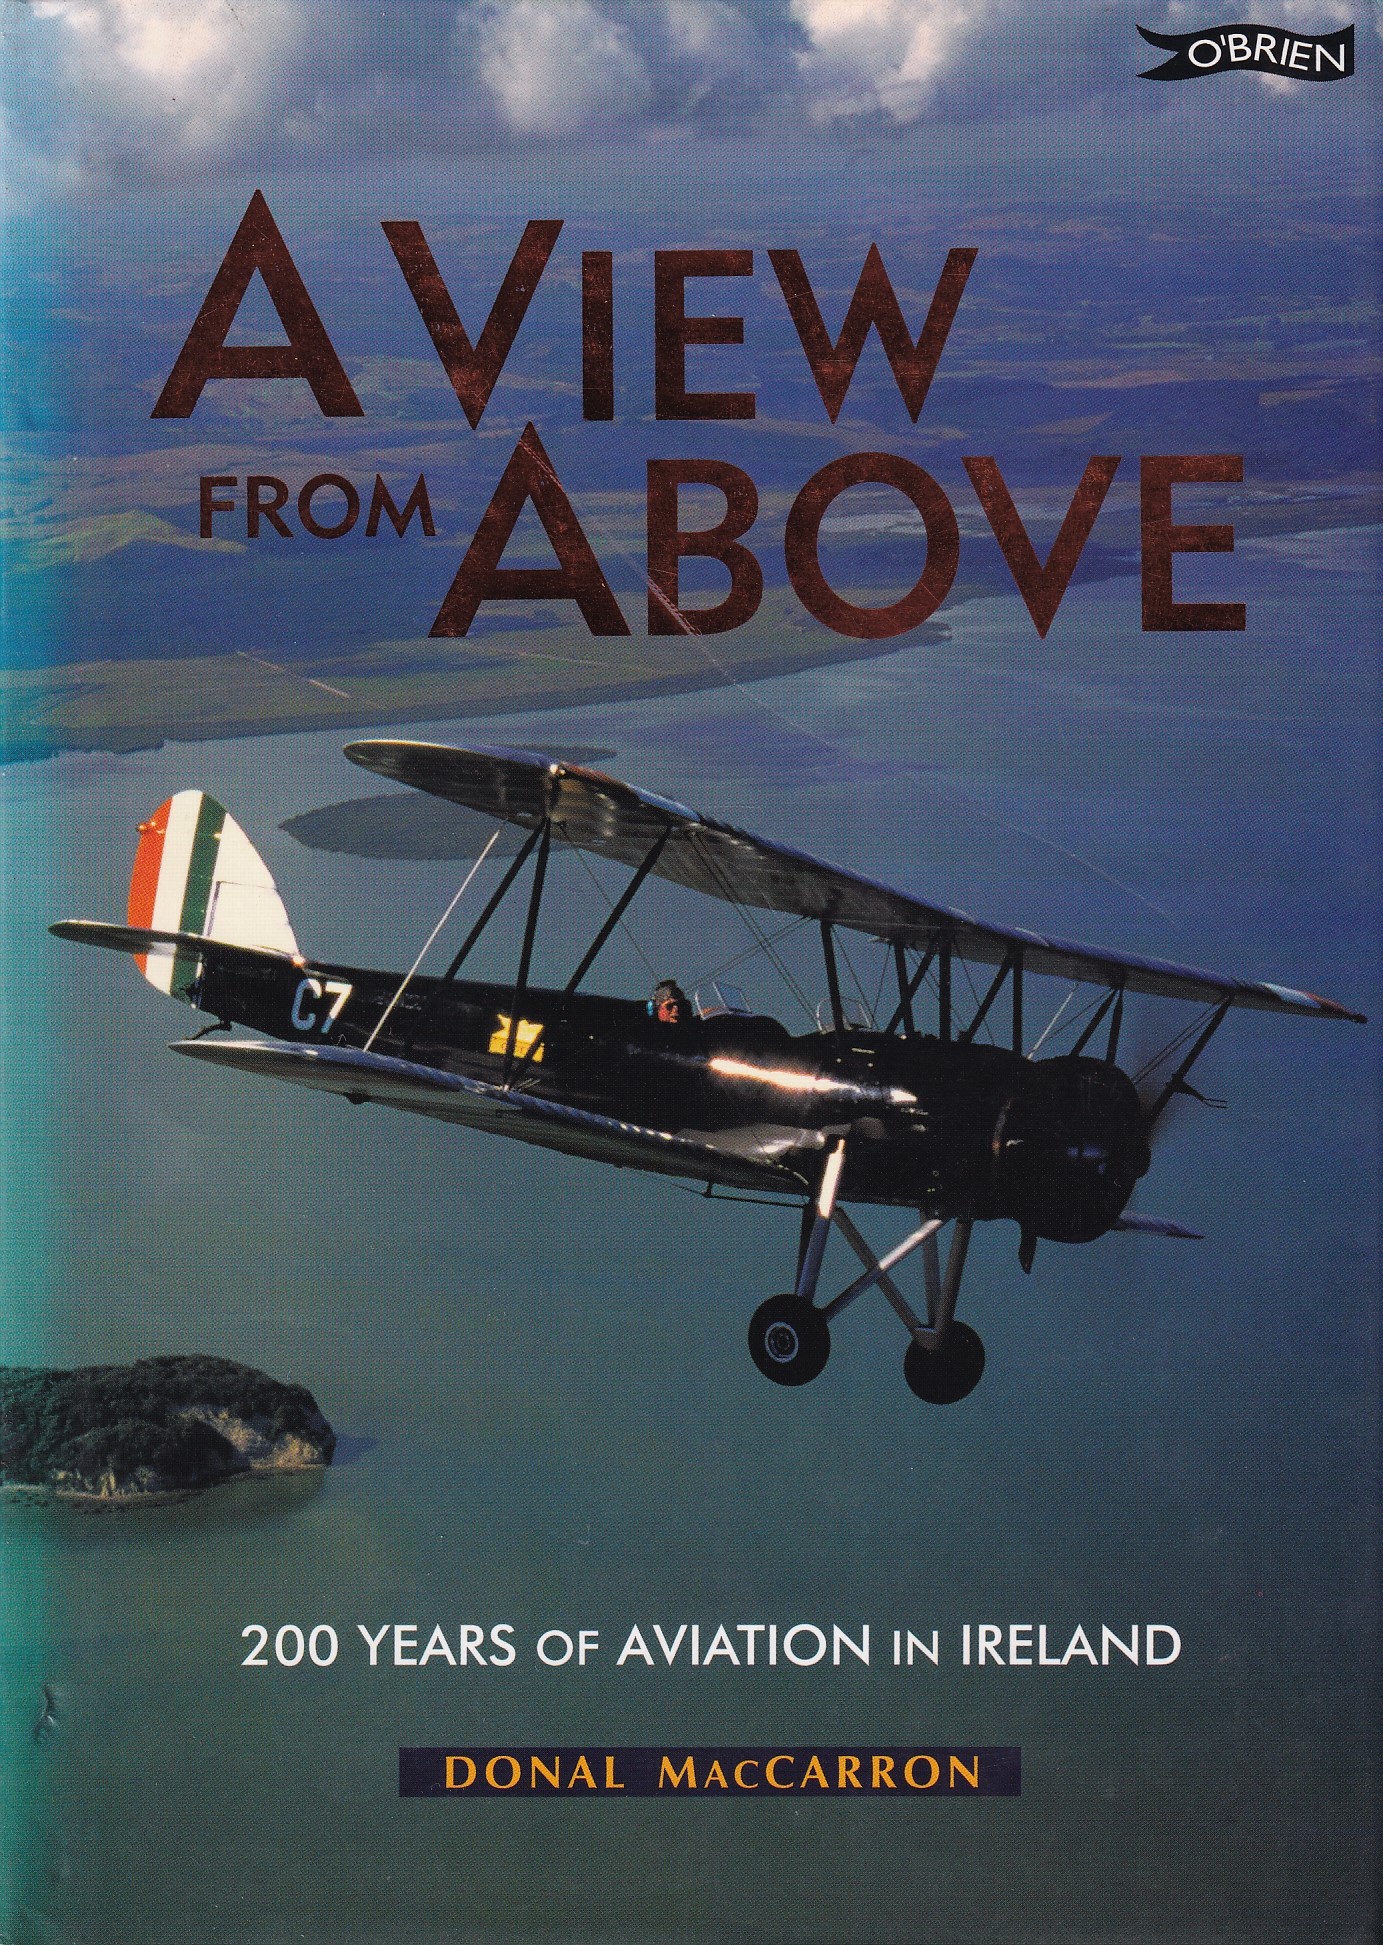 A View from Above: 200 Years of Aviation in Ireland by Donal MacCarron